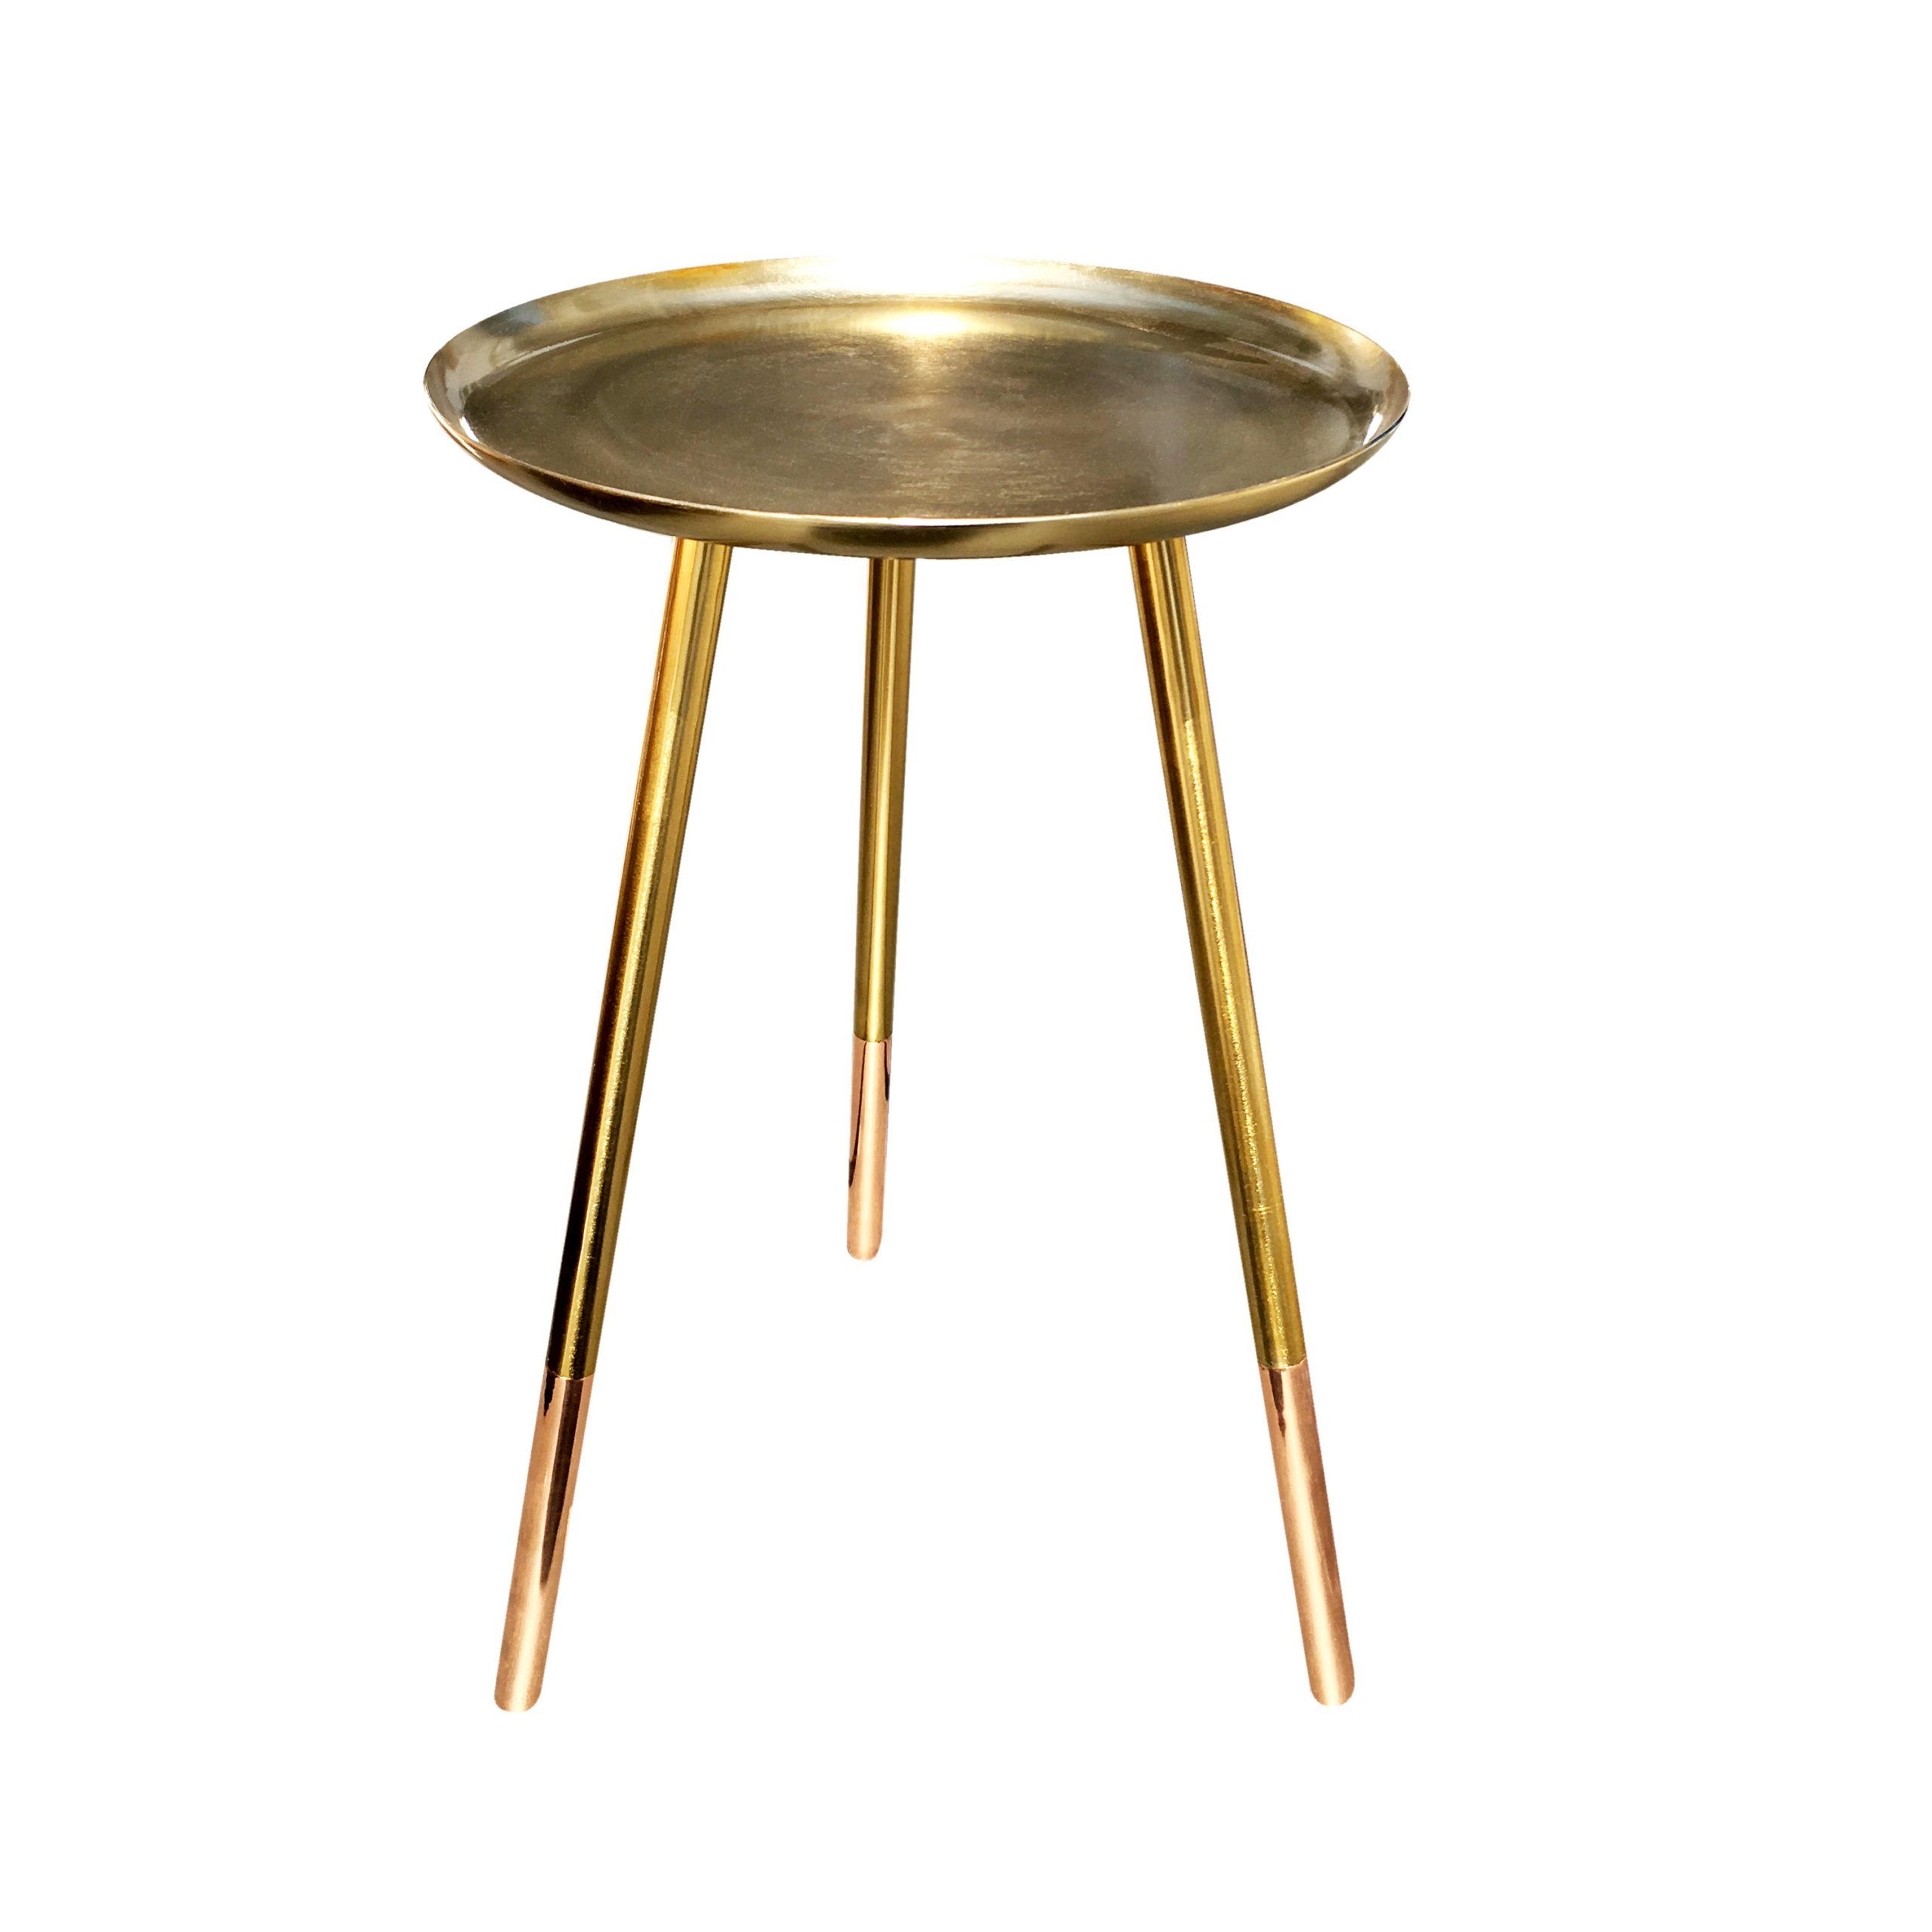 Round Brass Table With Tripod Copper Legs – A Little Arty Pertaining To Console Tables With Tripod Legs (View 14 of 20)